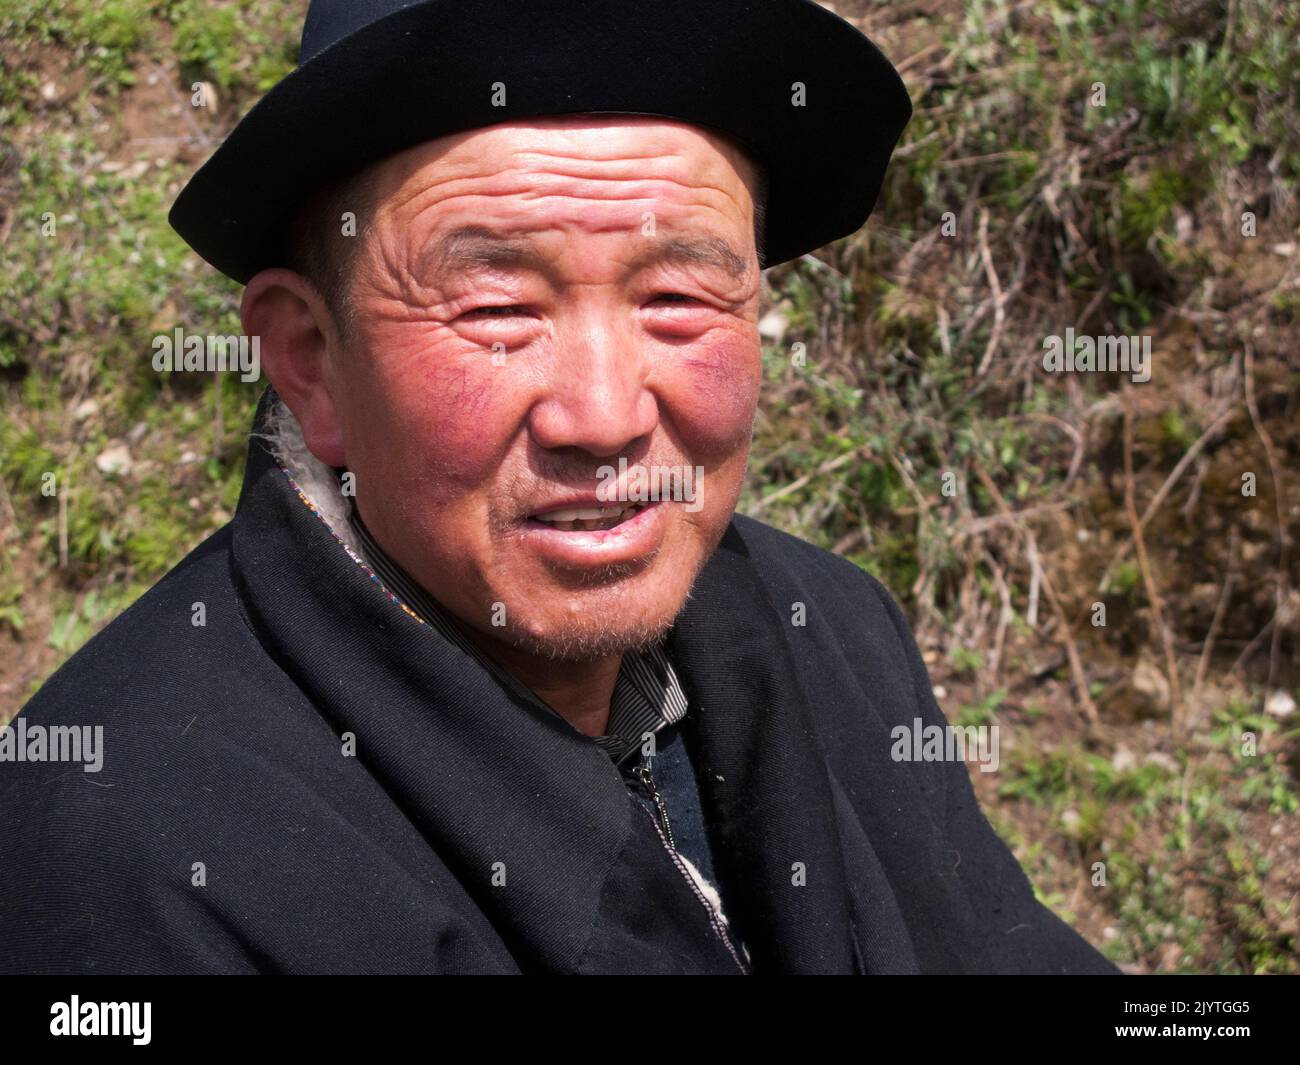 Face of a Tibetan horseman / man / ethnic person of Tibet, resident or local to the walled ancient Chinese town of Songpan in northern Sichuan province, China. Leader of a horse trekking pony ride for western European holiday makers, tourists and visitors, portrait but without his horse. (126) Stock Photo